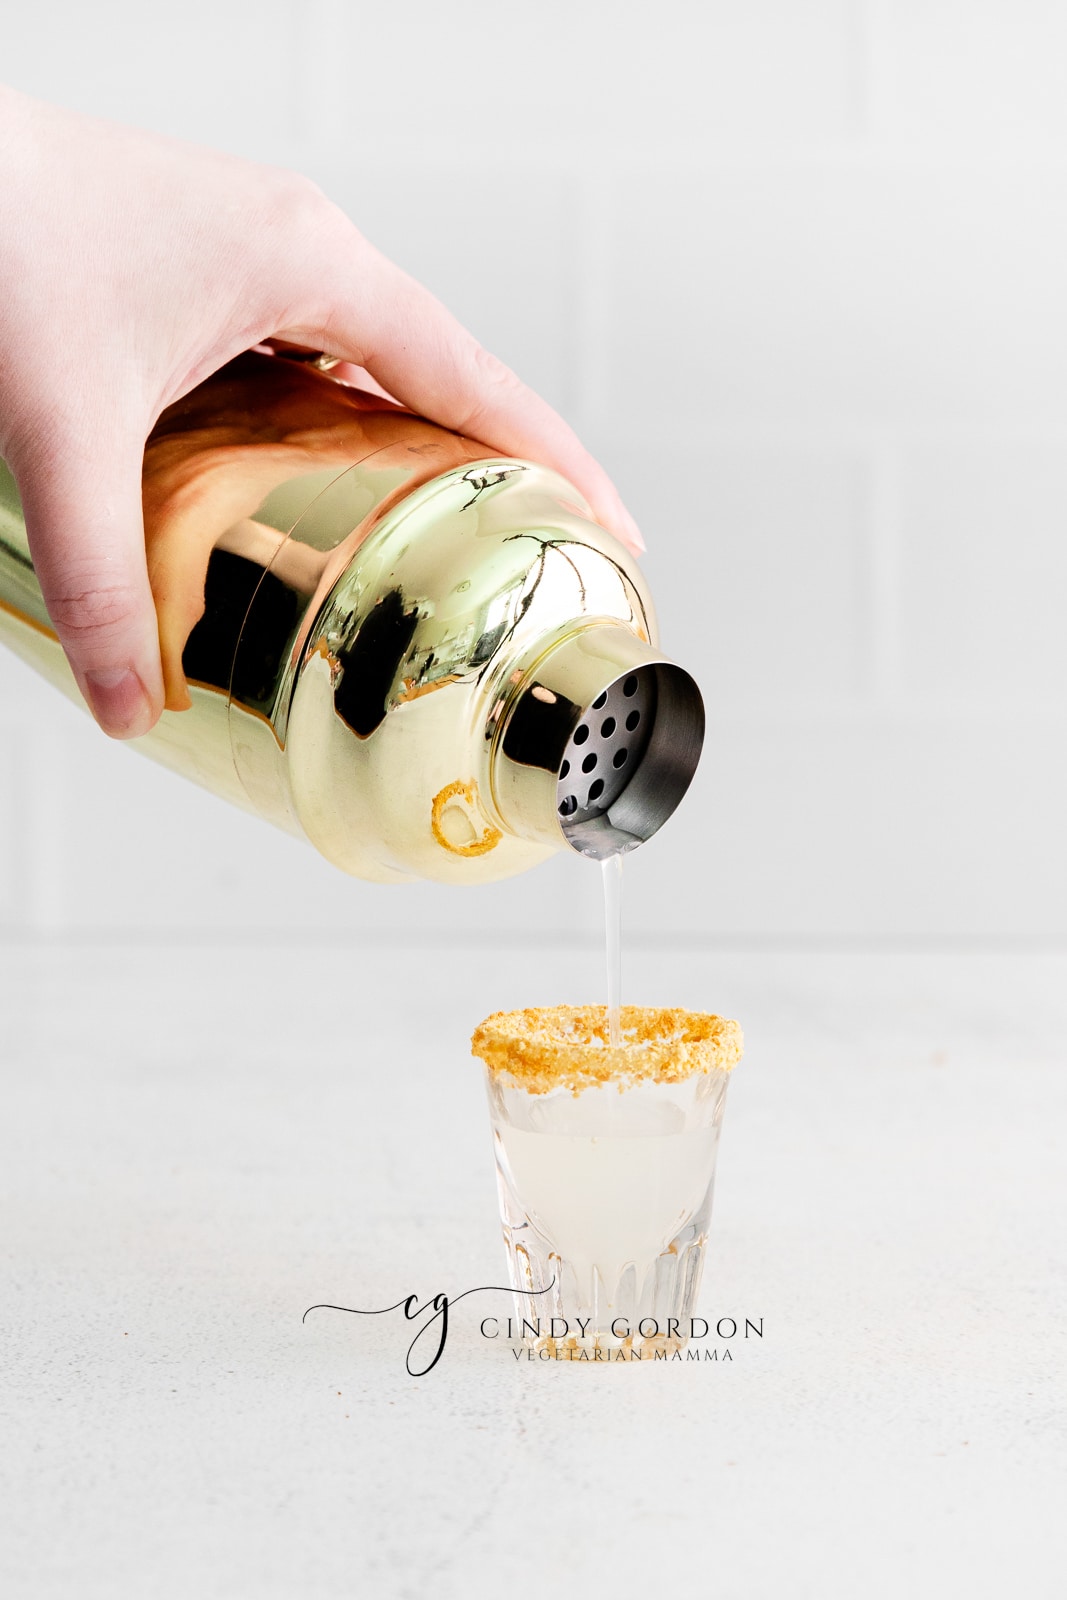 gold cocktail shaker pouring clear liquid into shot glass with brown crumbles on rim